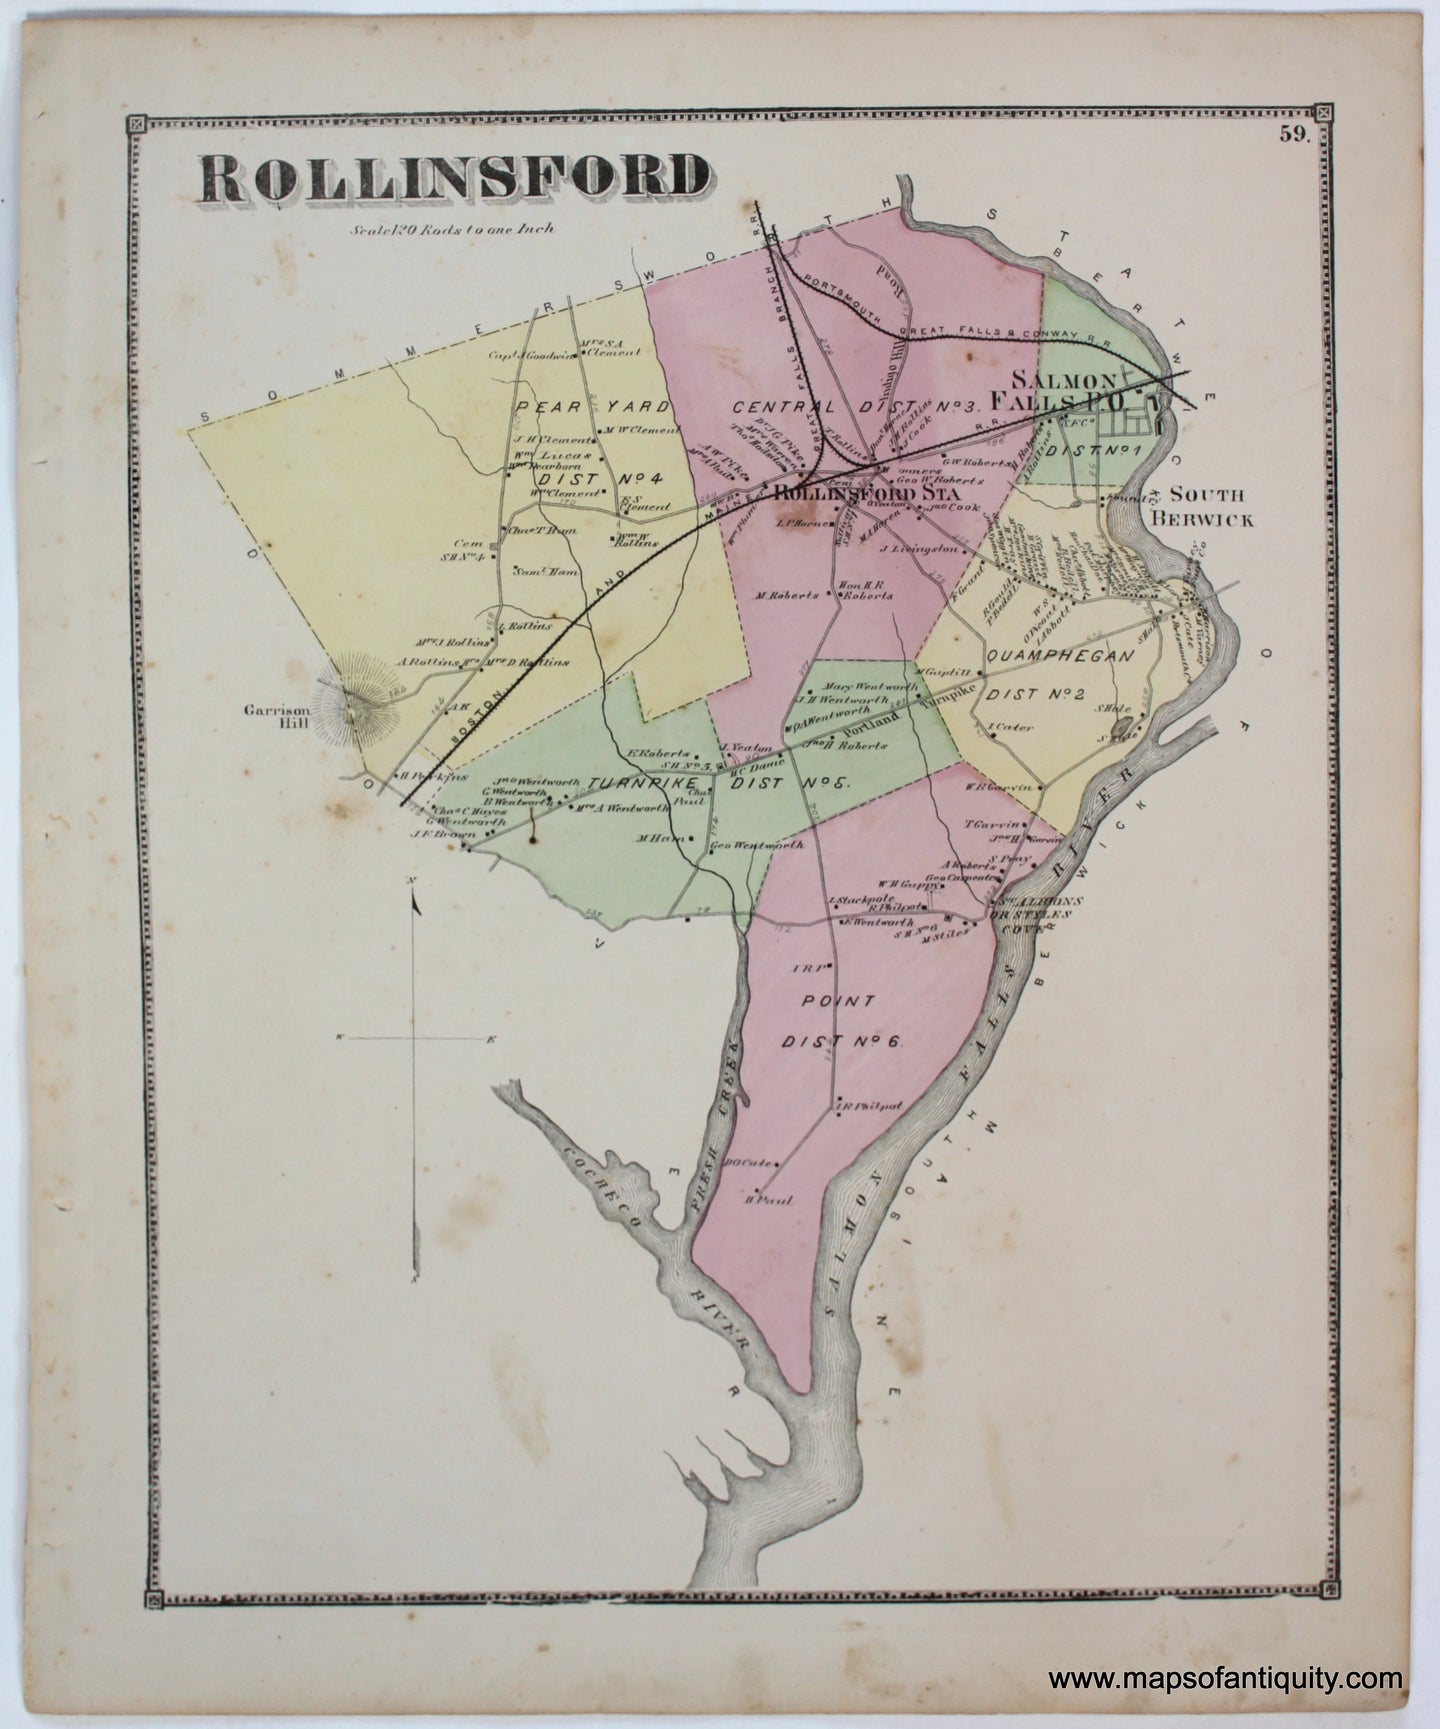 Antique-Map-Rollinsford-Strafford-County-Town-Towns-New-Hampshire-NH-Sanford-Everts-1871-1870s-1800s-Mid-Late-19th-Century-Maps-of-Antiquity